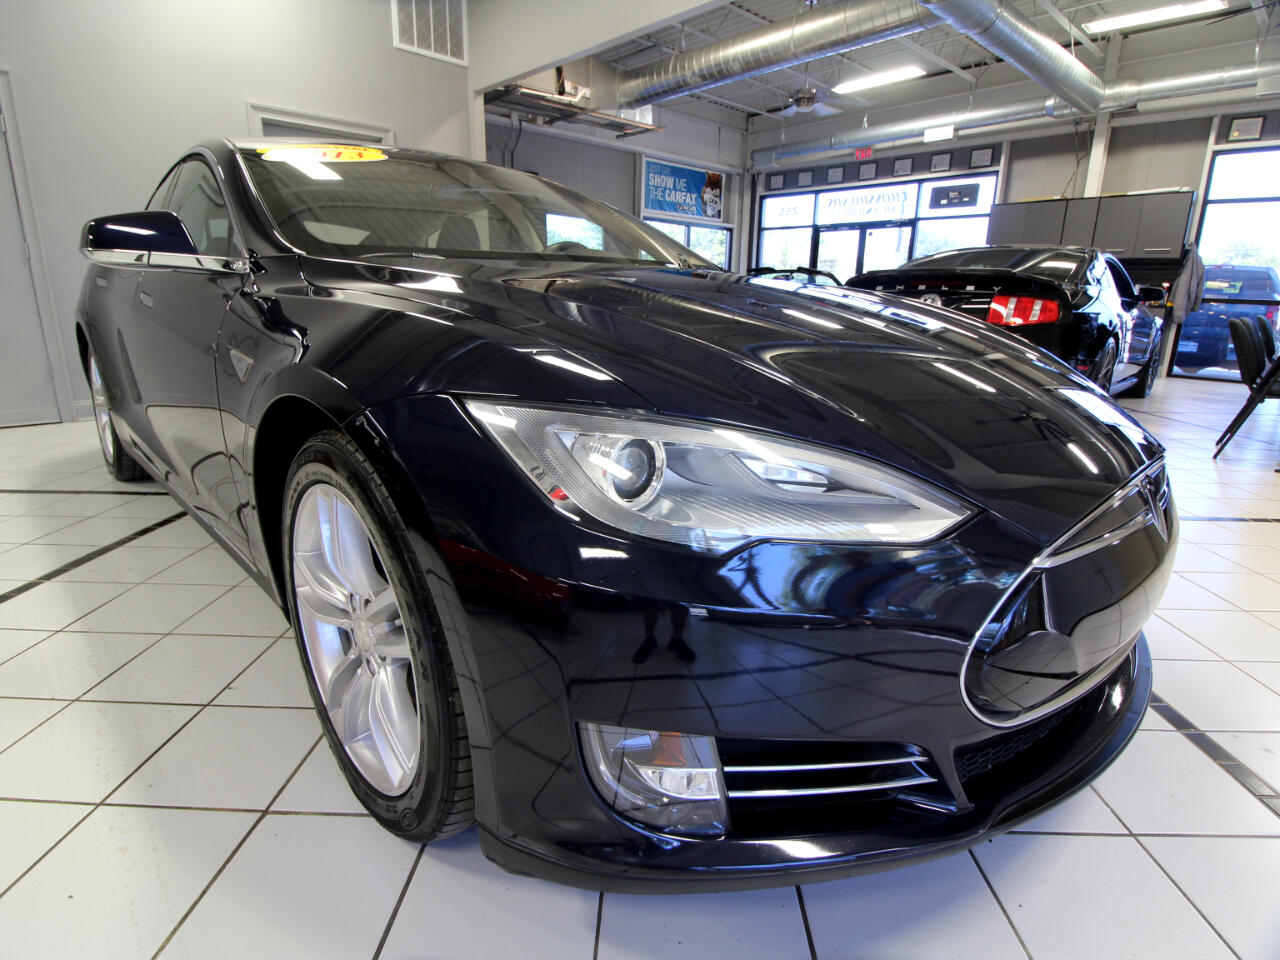 Used 2013 Tesla Model S 85 For Sale In Milford Oh 45150